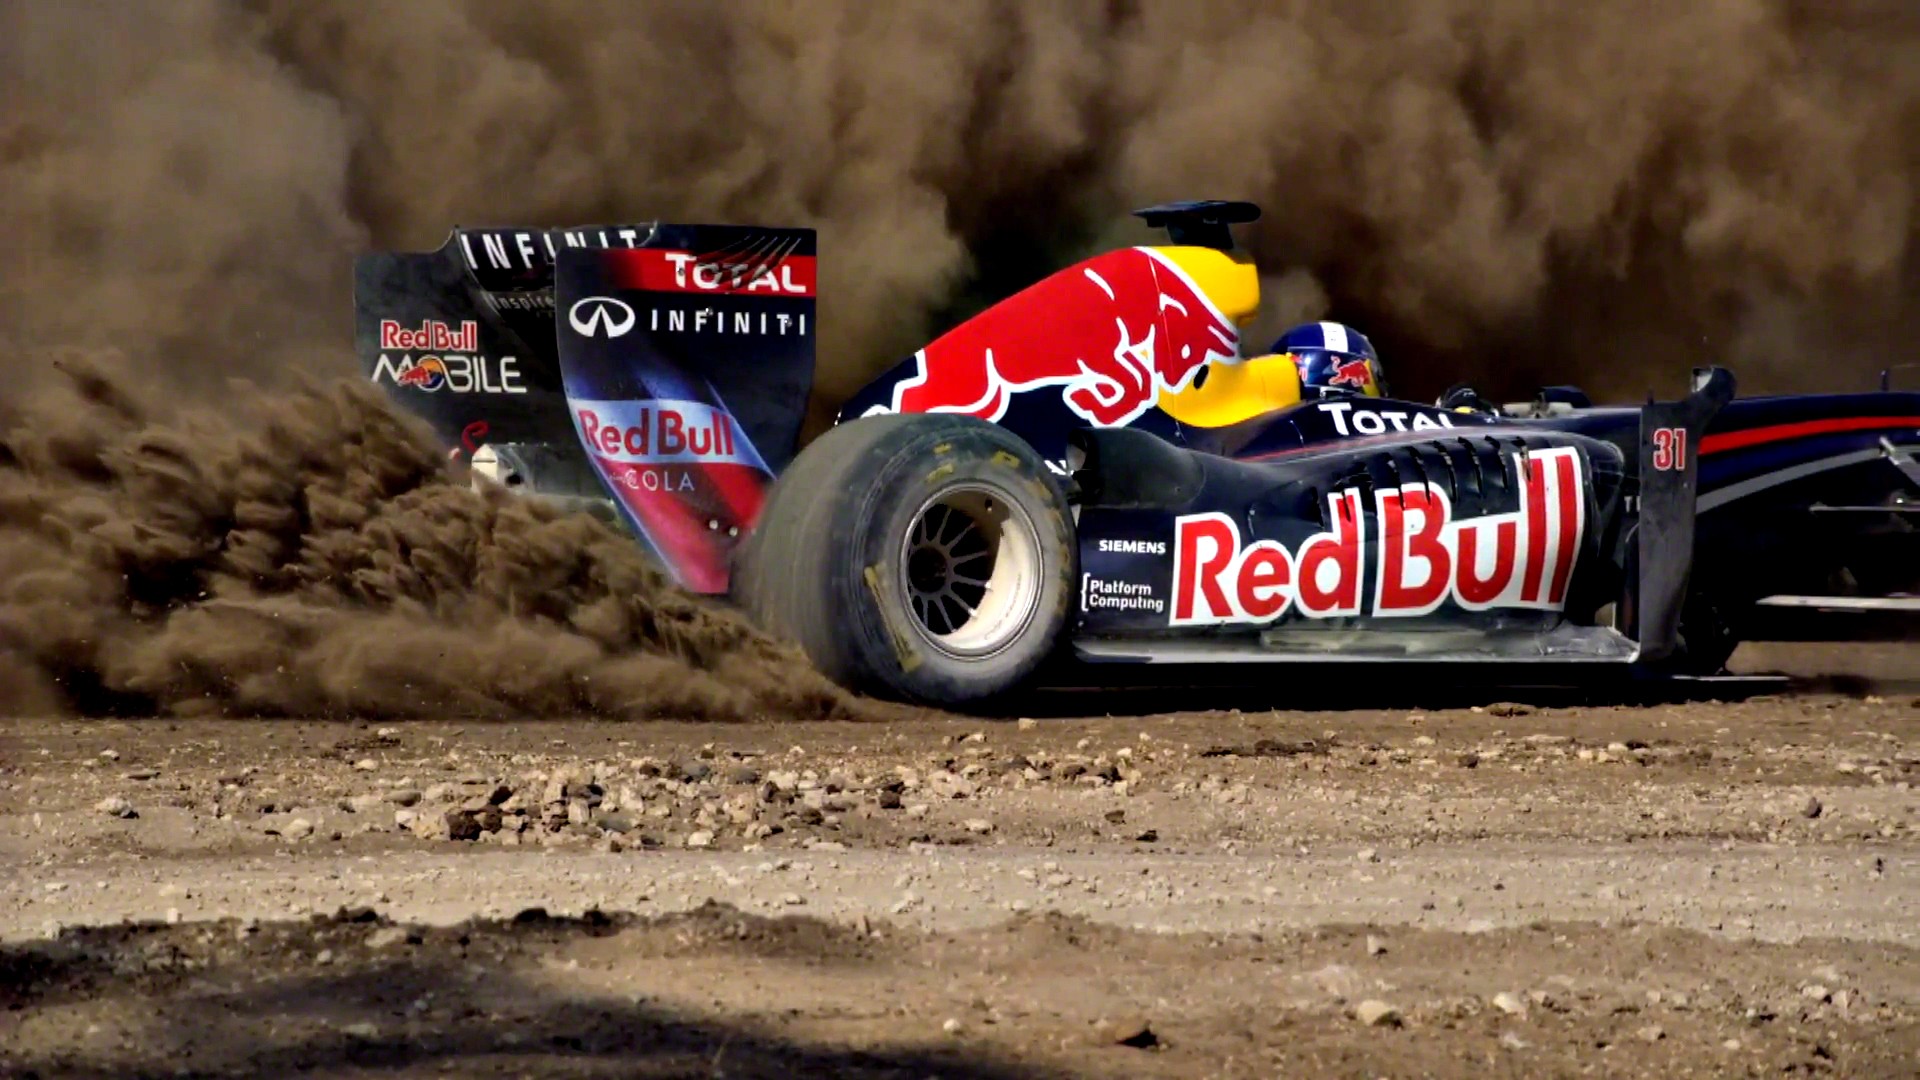 One Red Bull Racing David Coulthard HD Wallpaper